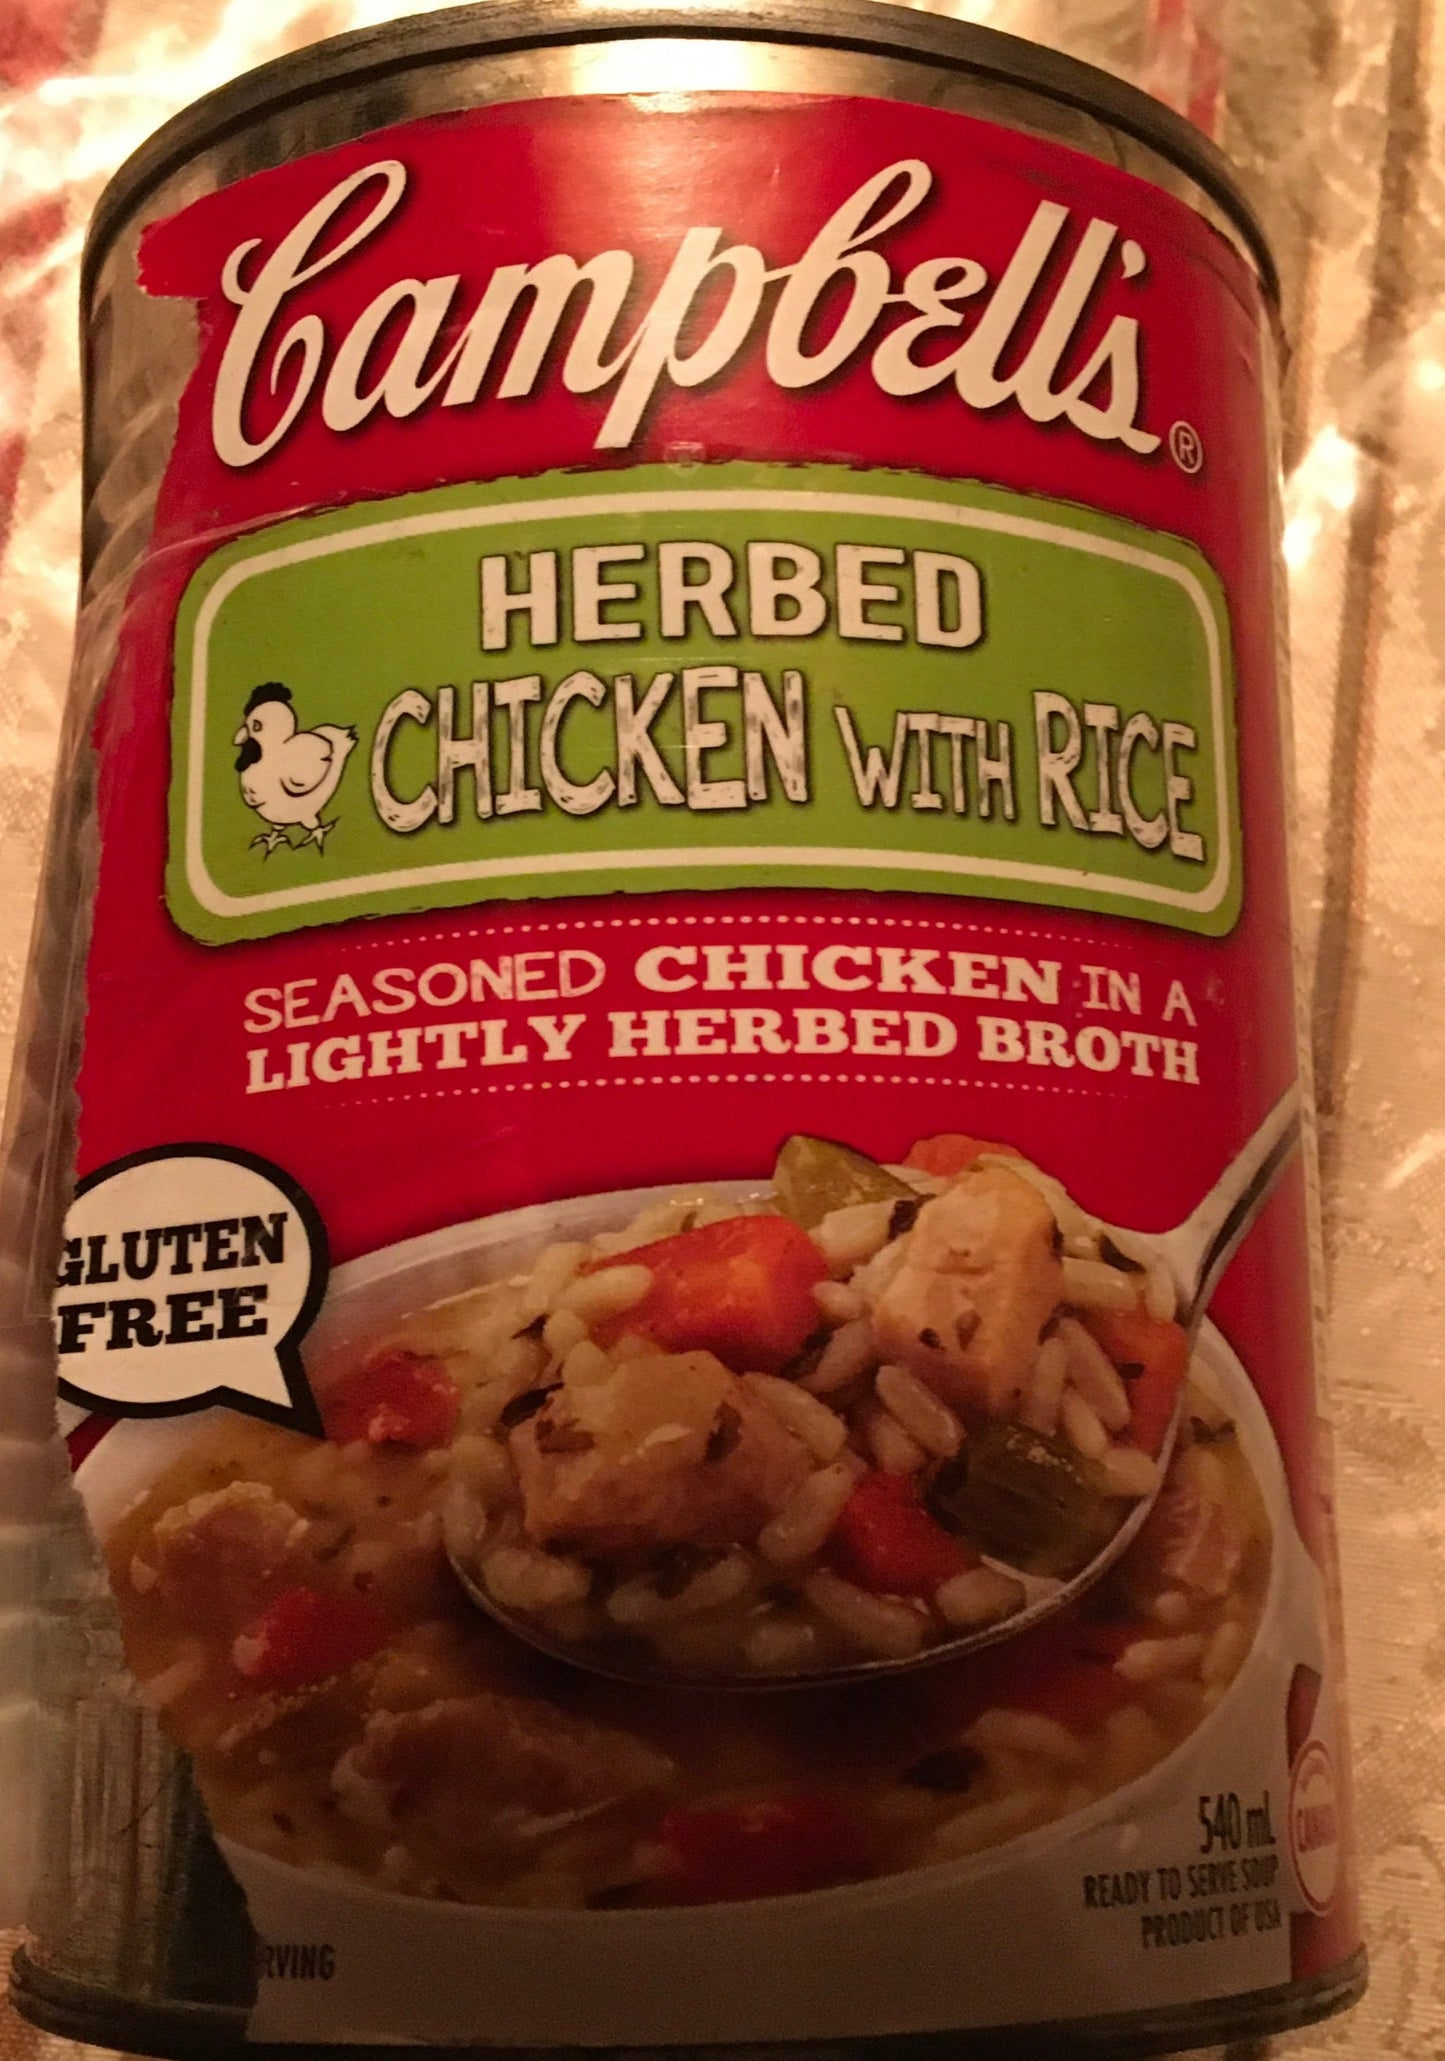 Campbell’s Herbed Chicken with Rice